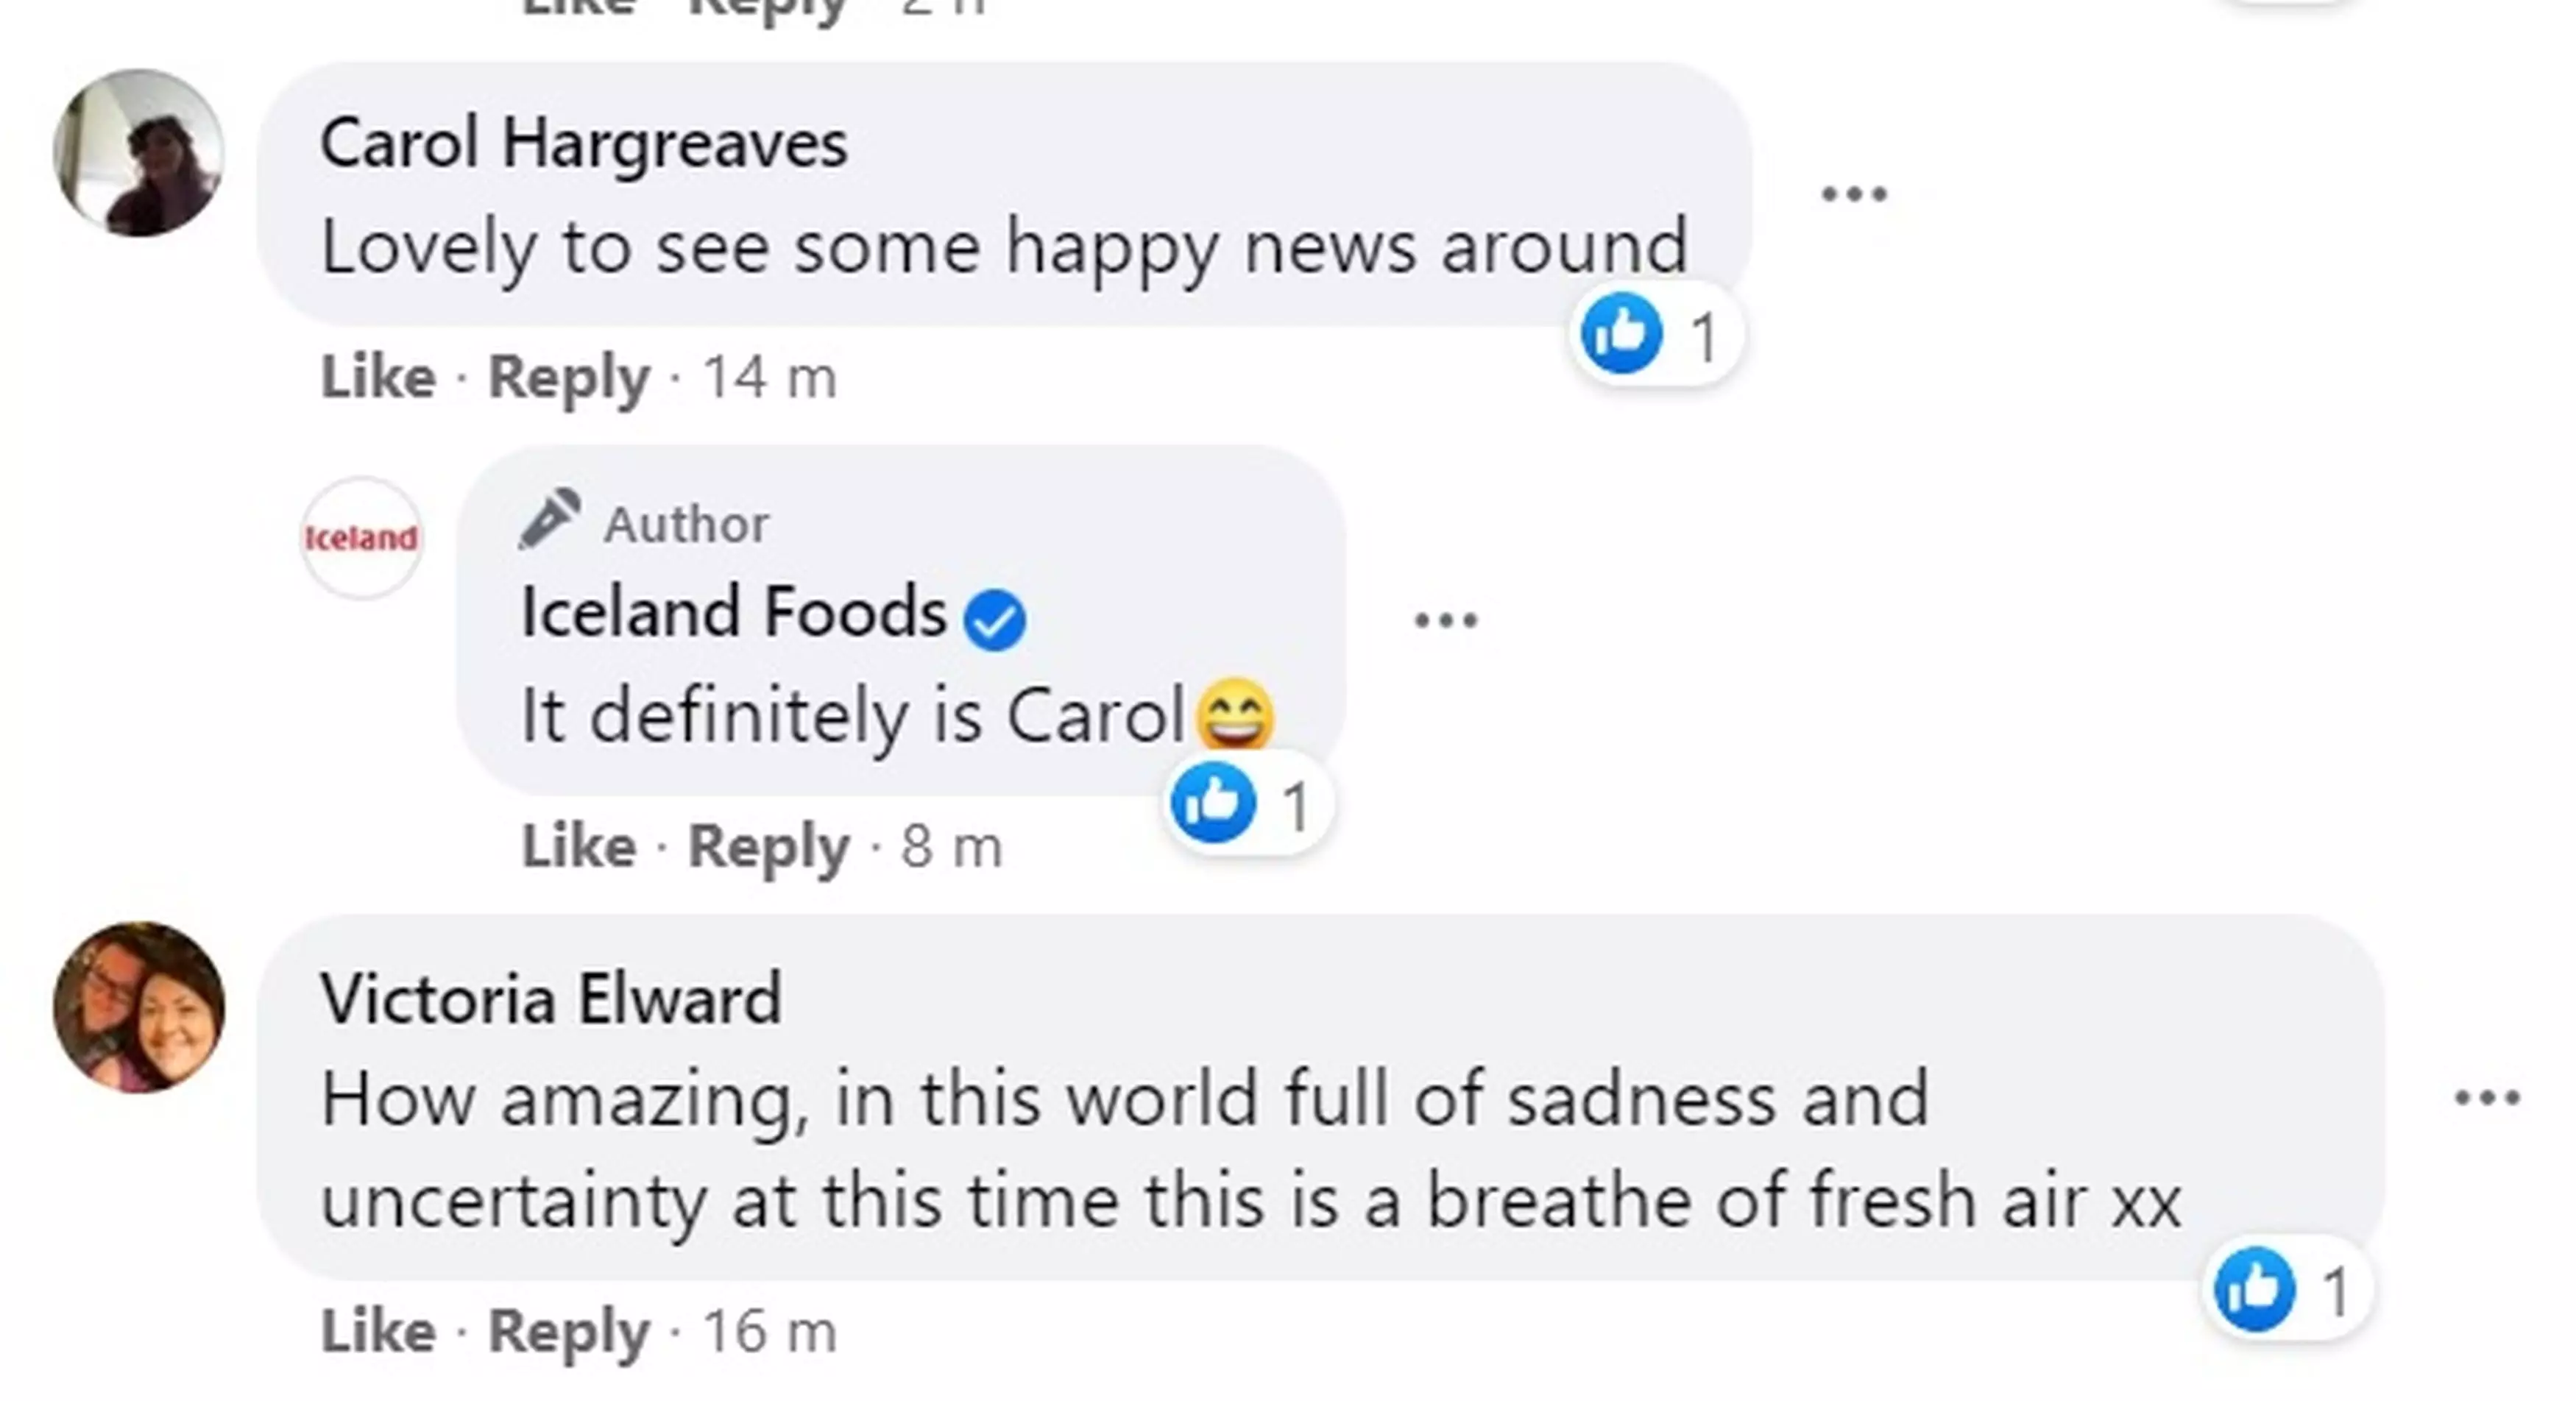 Facebook users were pleased to see some happy news (